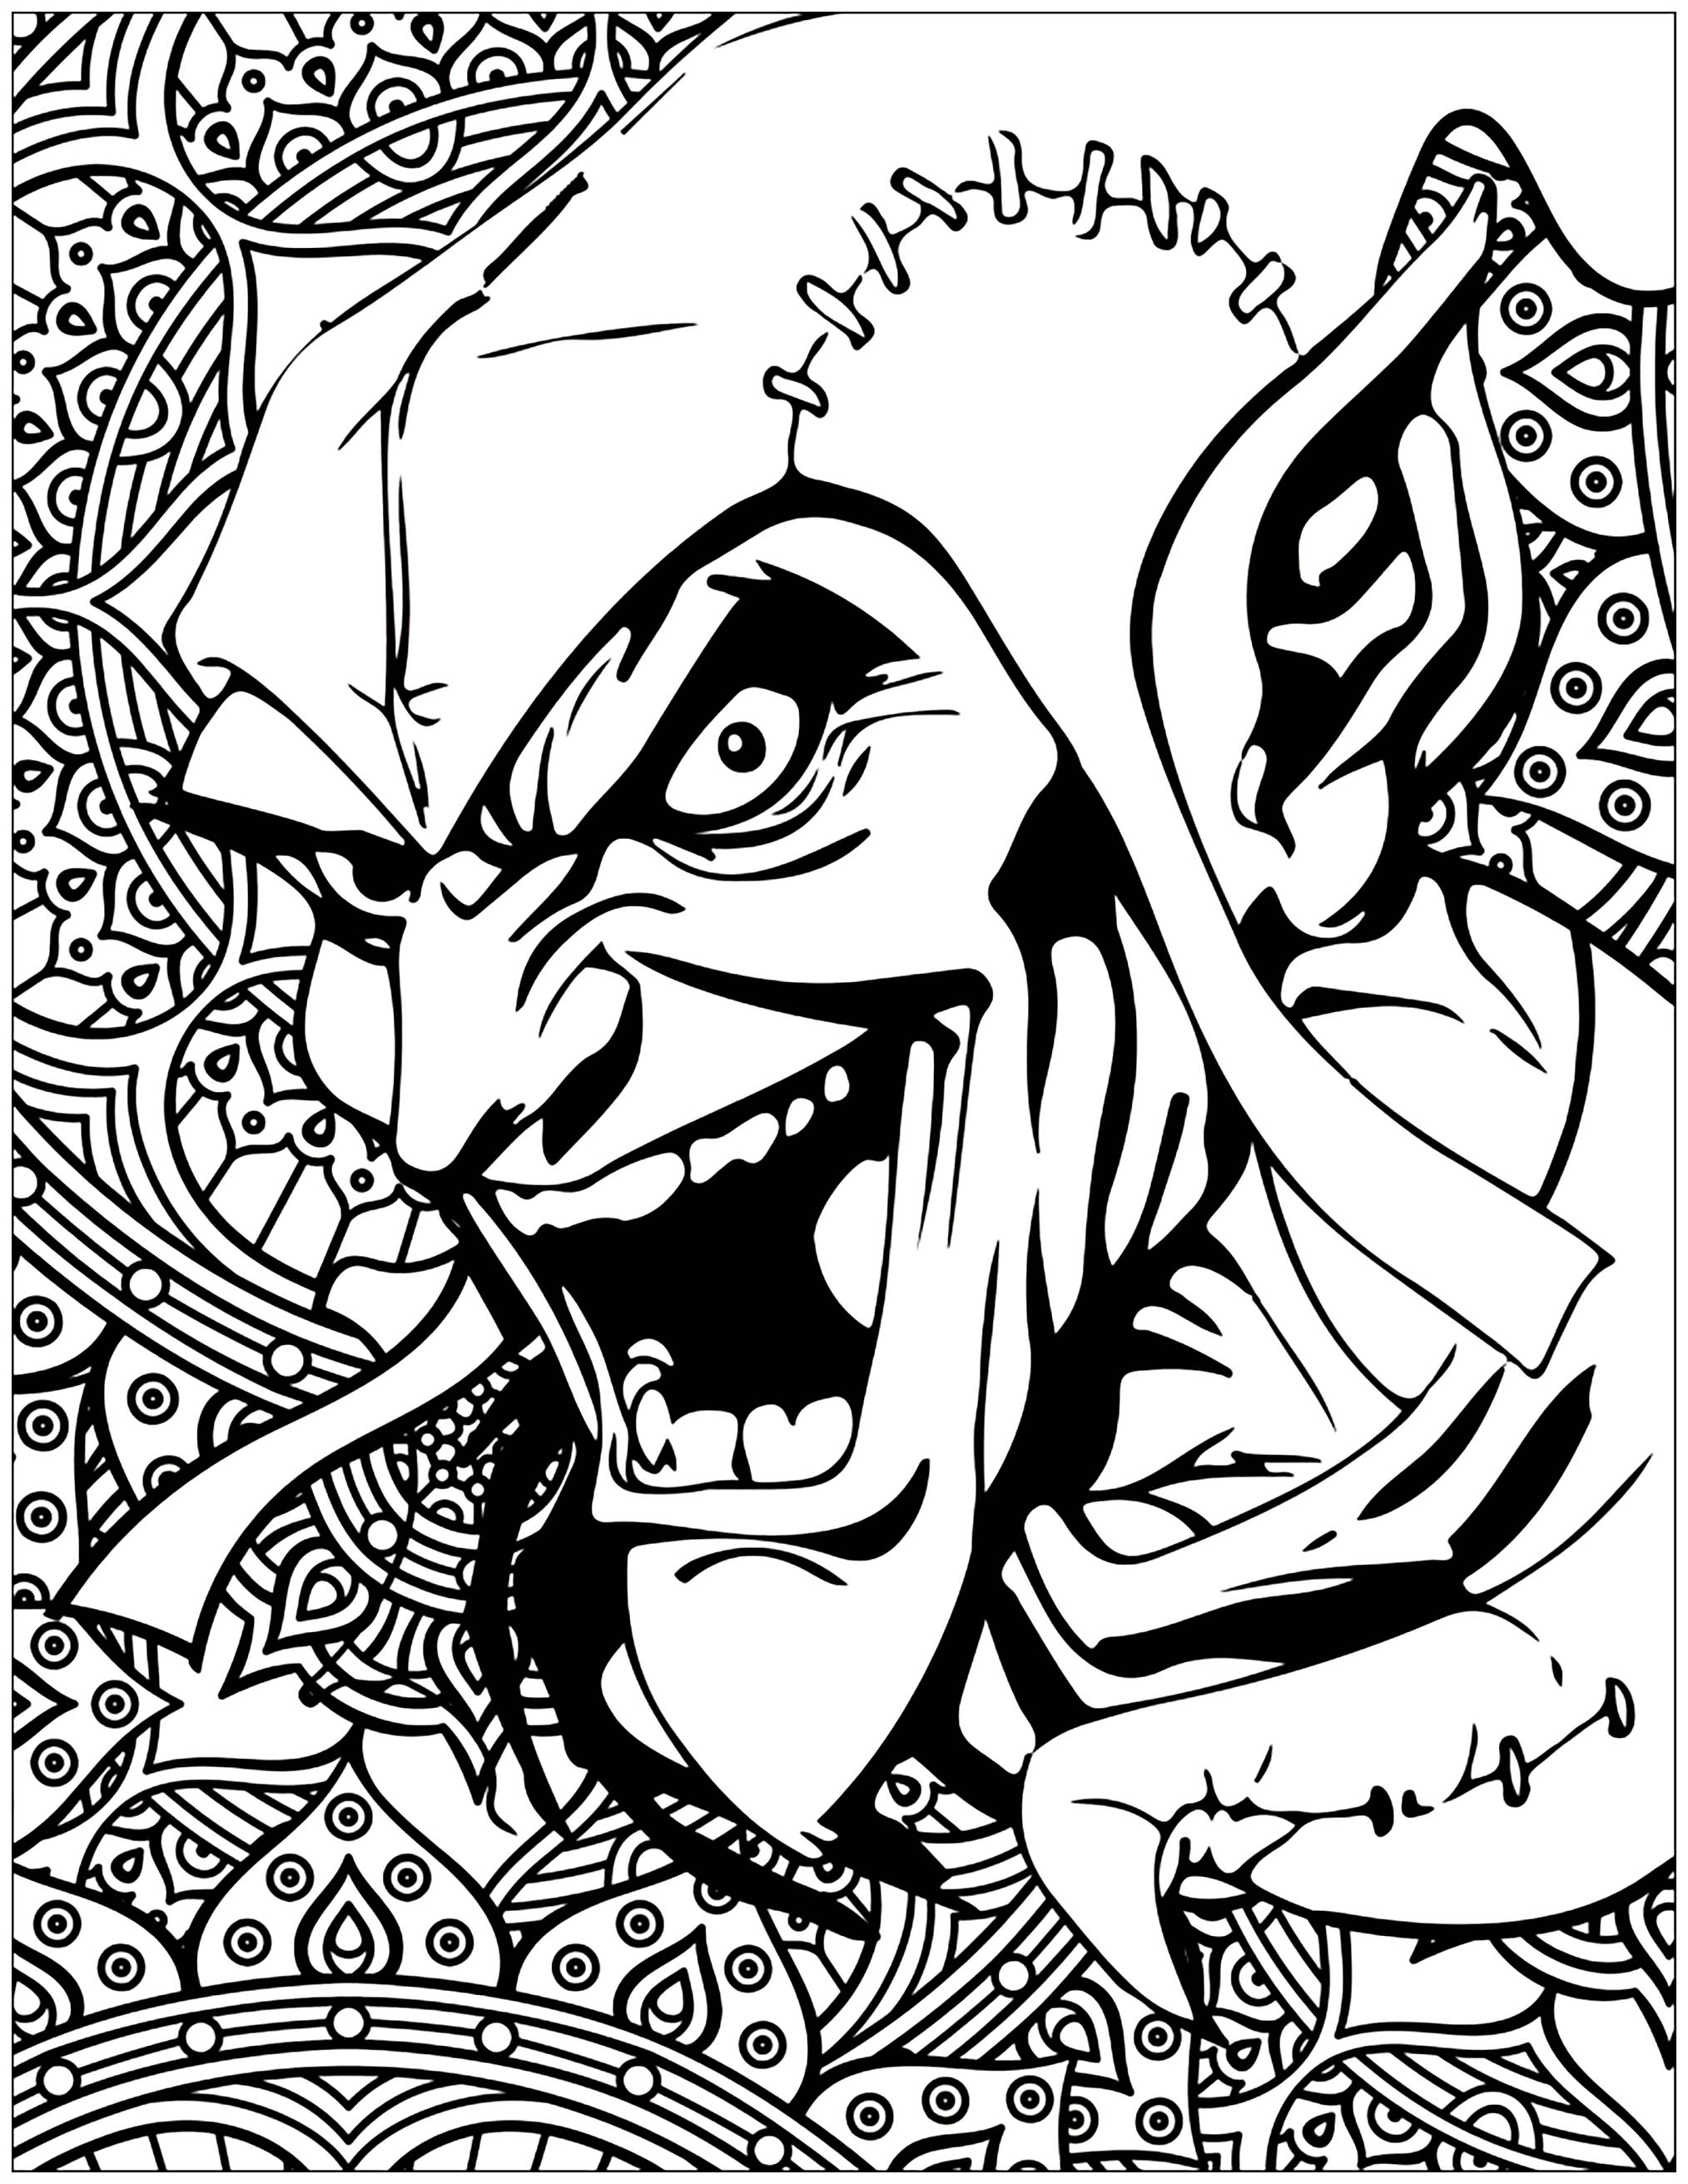 Books and Comics - Coloring Pages for Adults